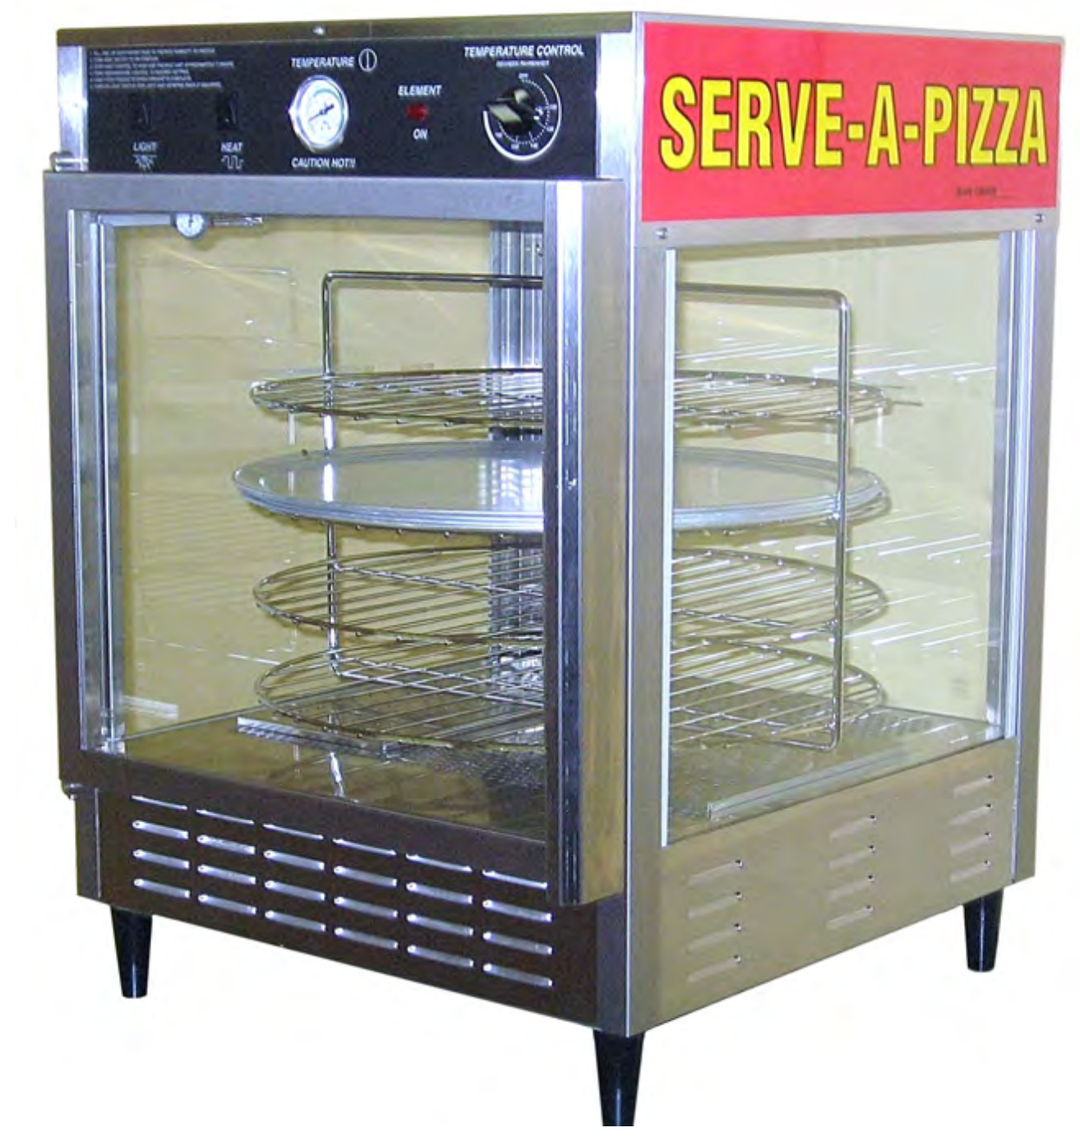 5550 Humidified Pizza Warmer - SERVE-A-PIZZA